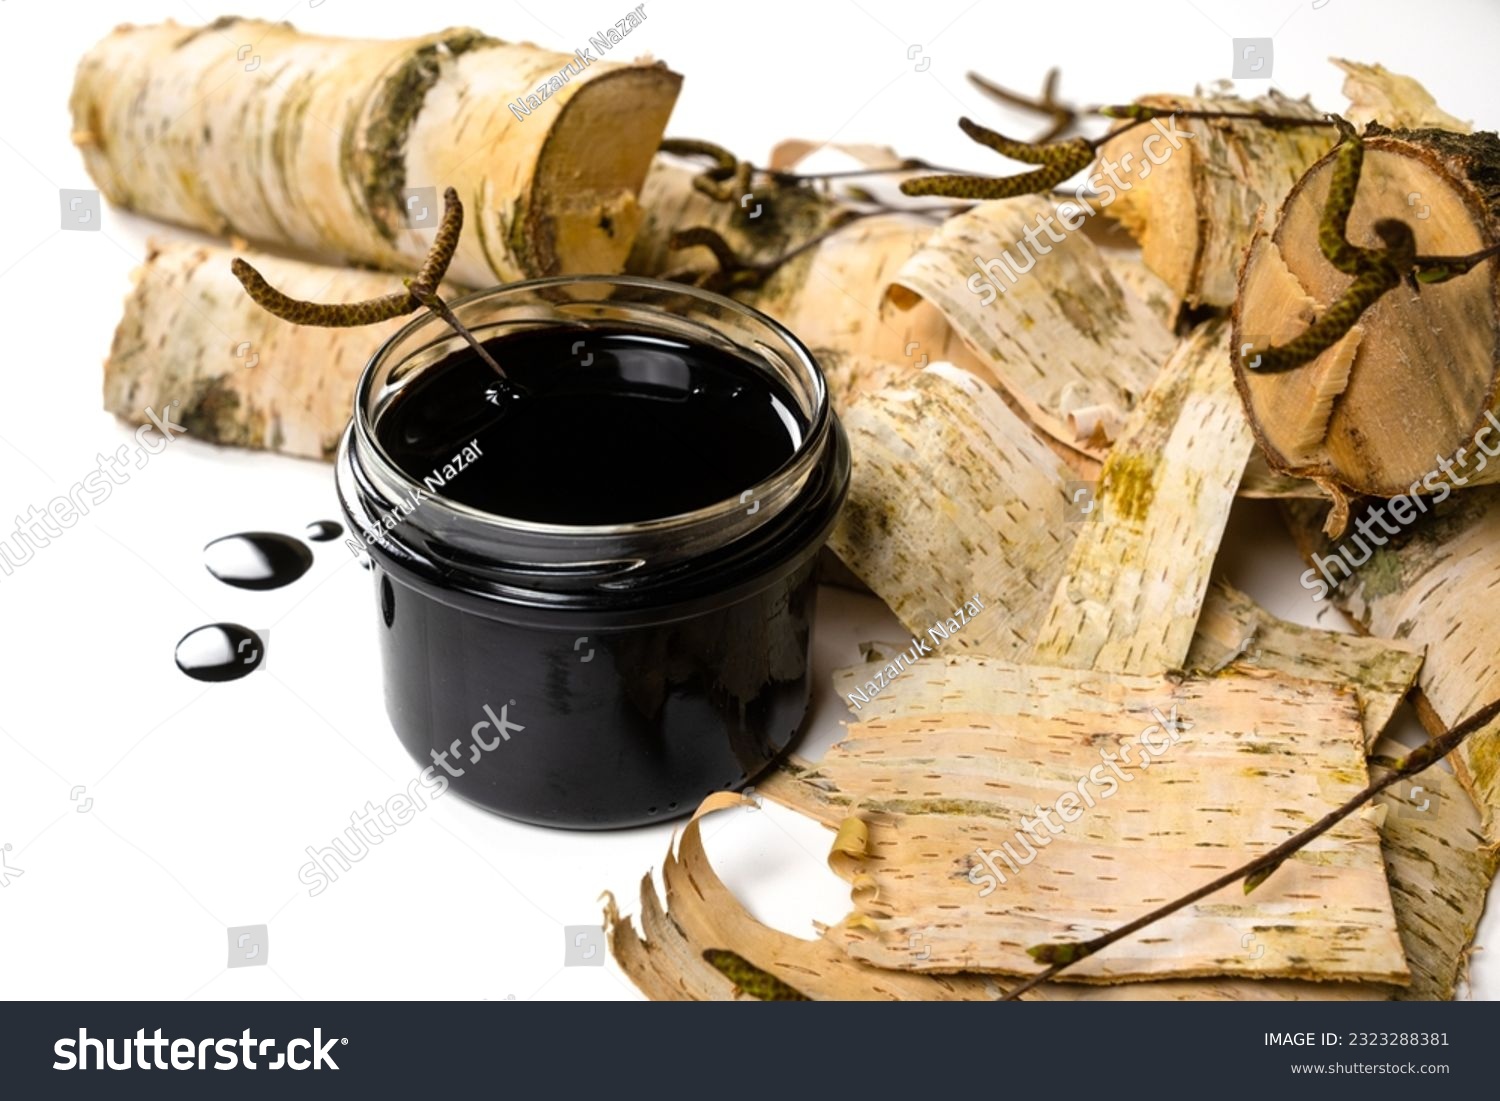 Birch tar or pitch in a jar and birch tree bark on white background. Wood tar. Liquid mineral tar from birch bark #2323288381